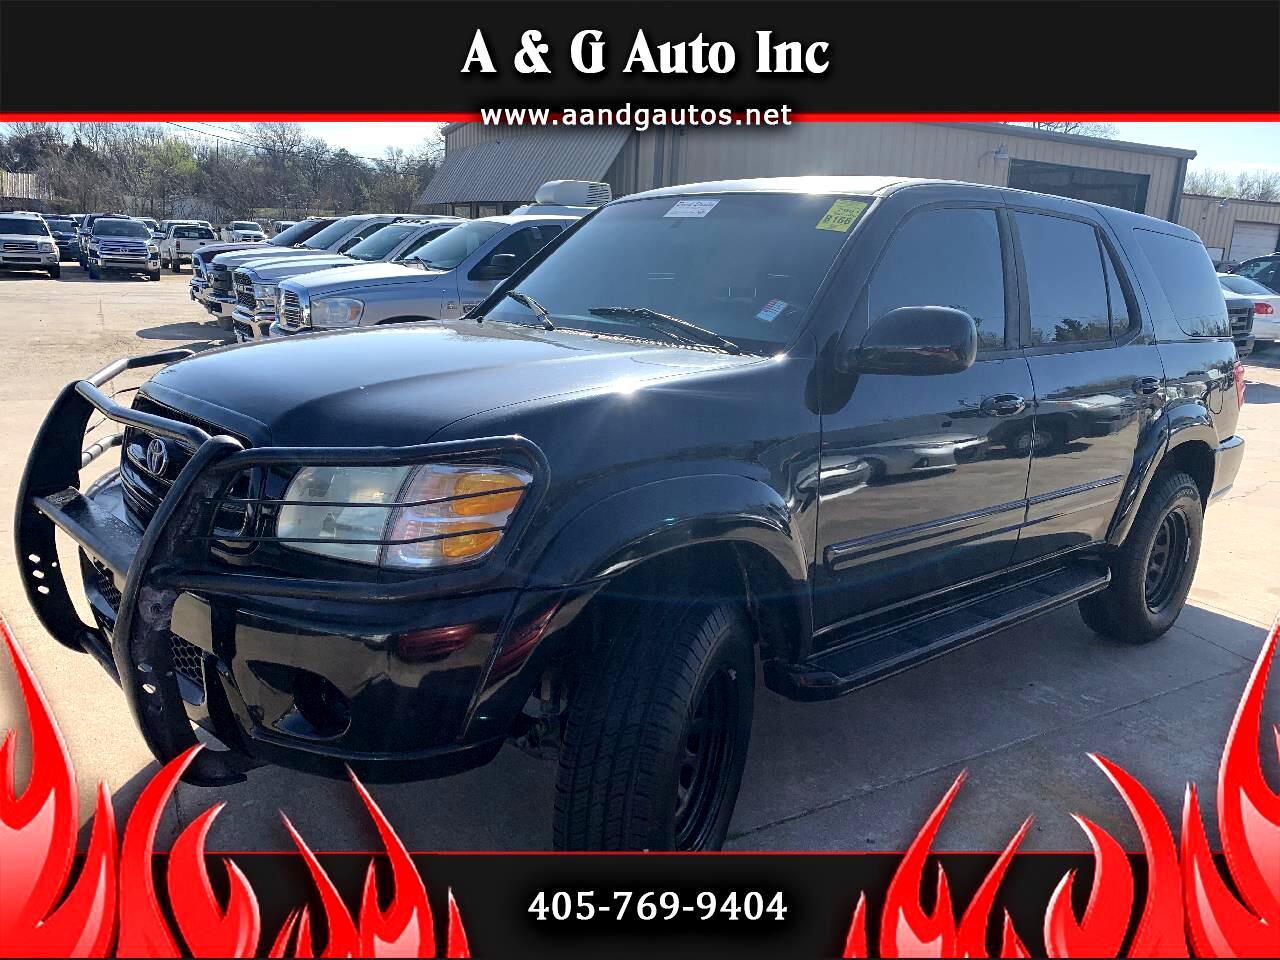 2001 Toyota Sequoia for sale in Oklahoma City OK 73141 by A & G Auto Inc